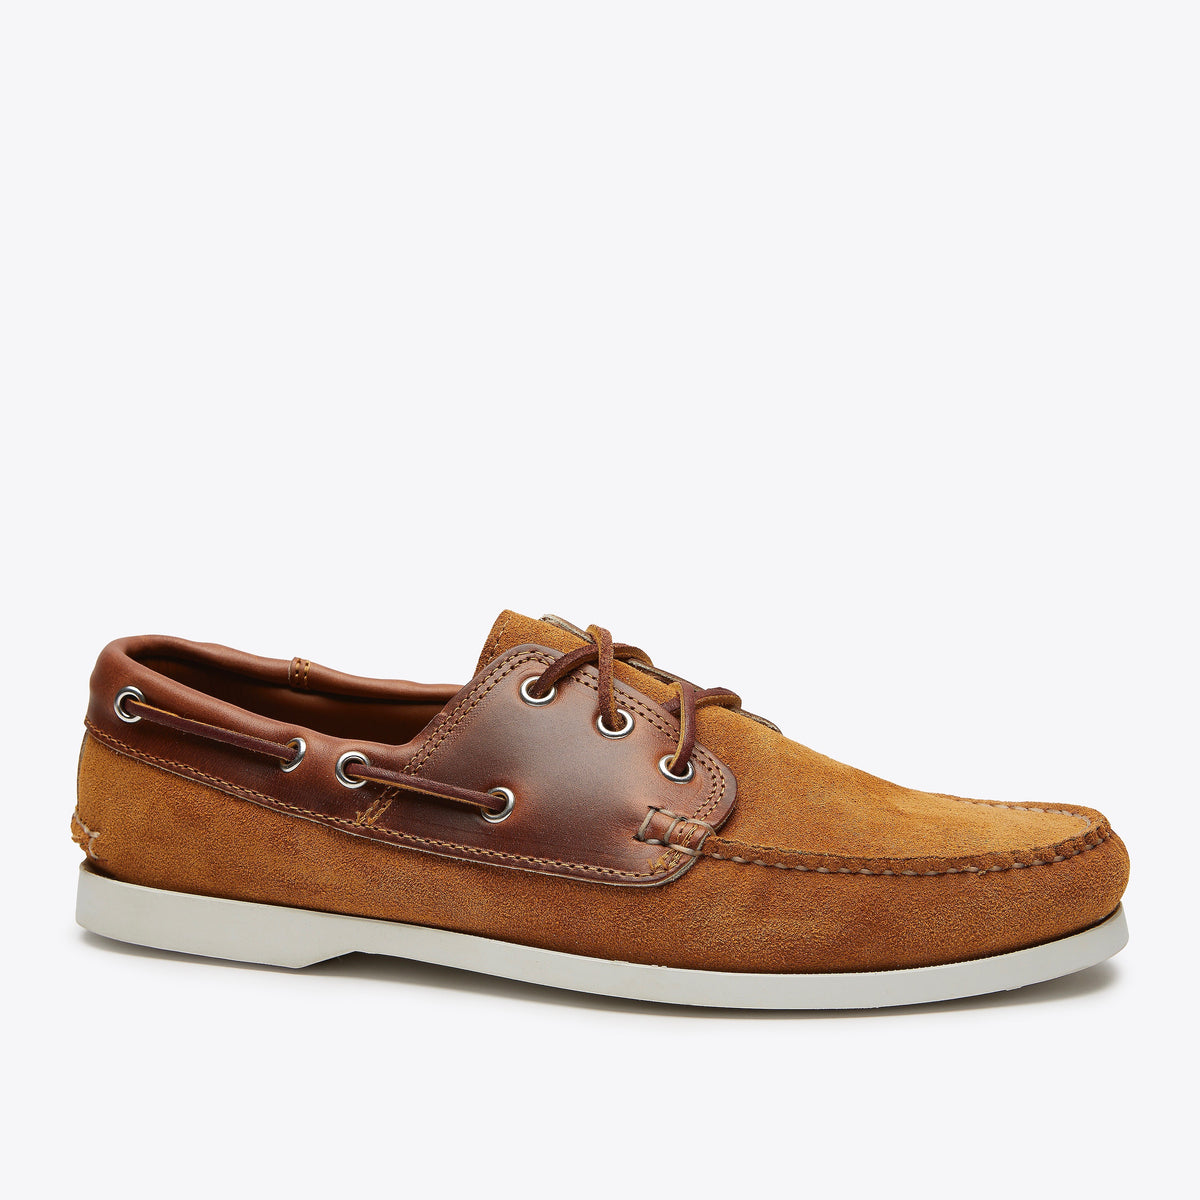 Quoddy Classic Boat Shoe - HH Toast 